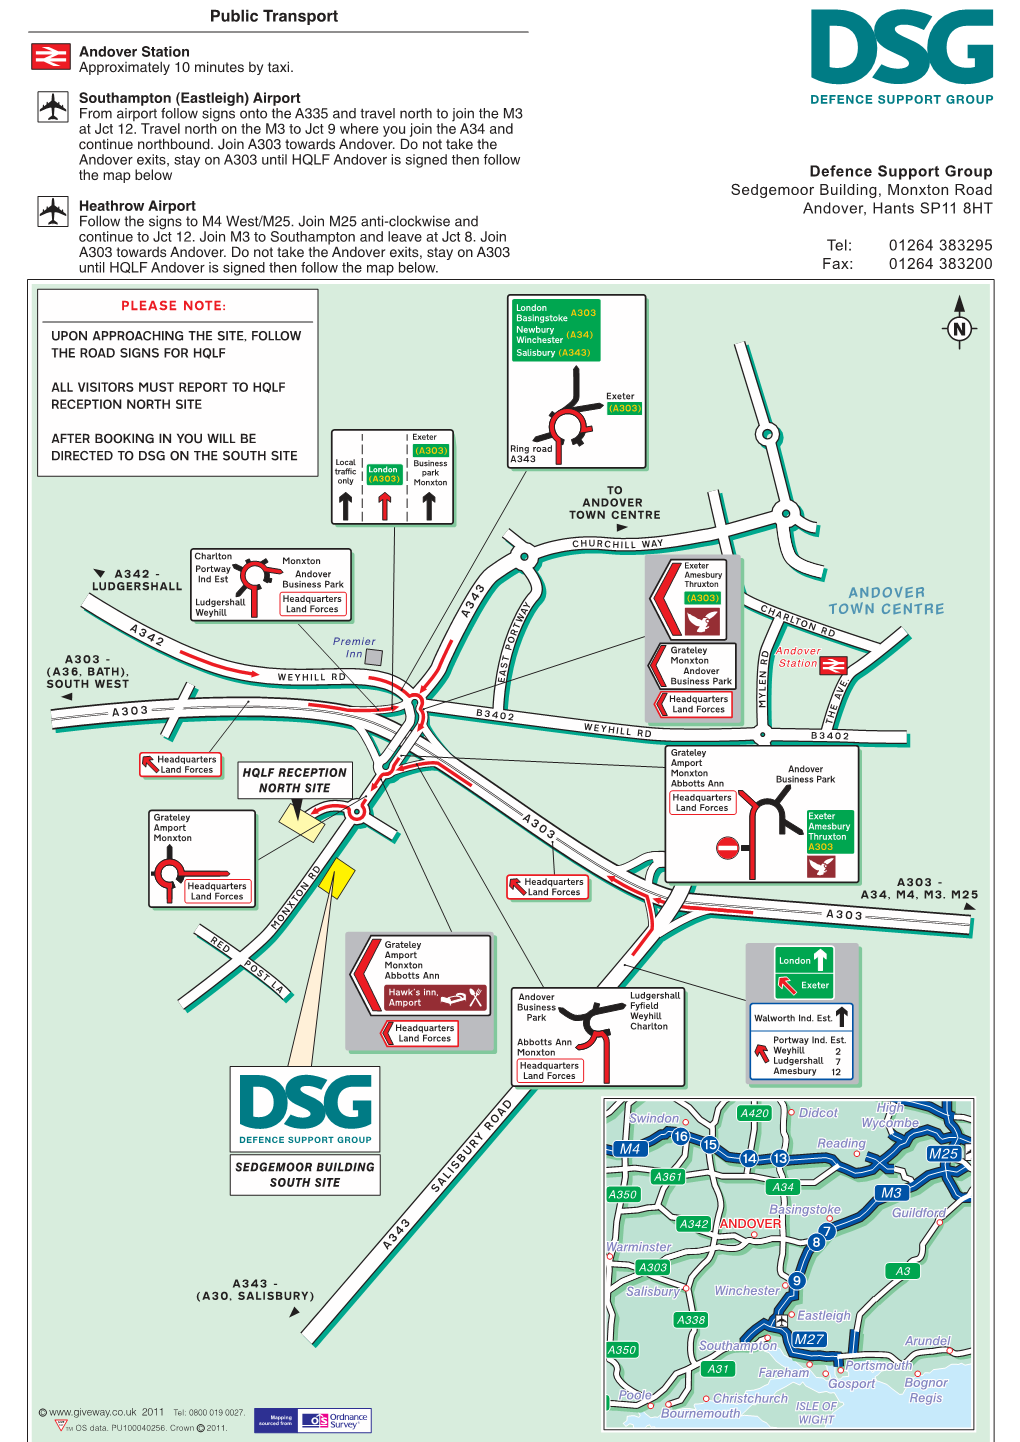 DSG on the SOUTH SITE (A303) Local Business A343 Traffic London Park Only (A303) Monxton to ANDOVER TOWN CENTRE